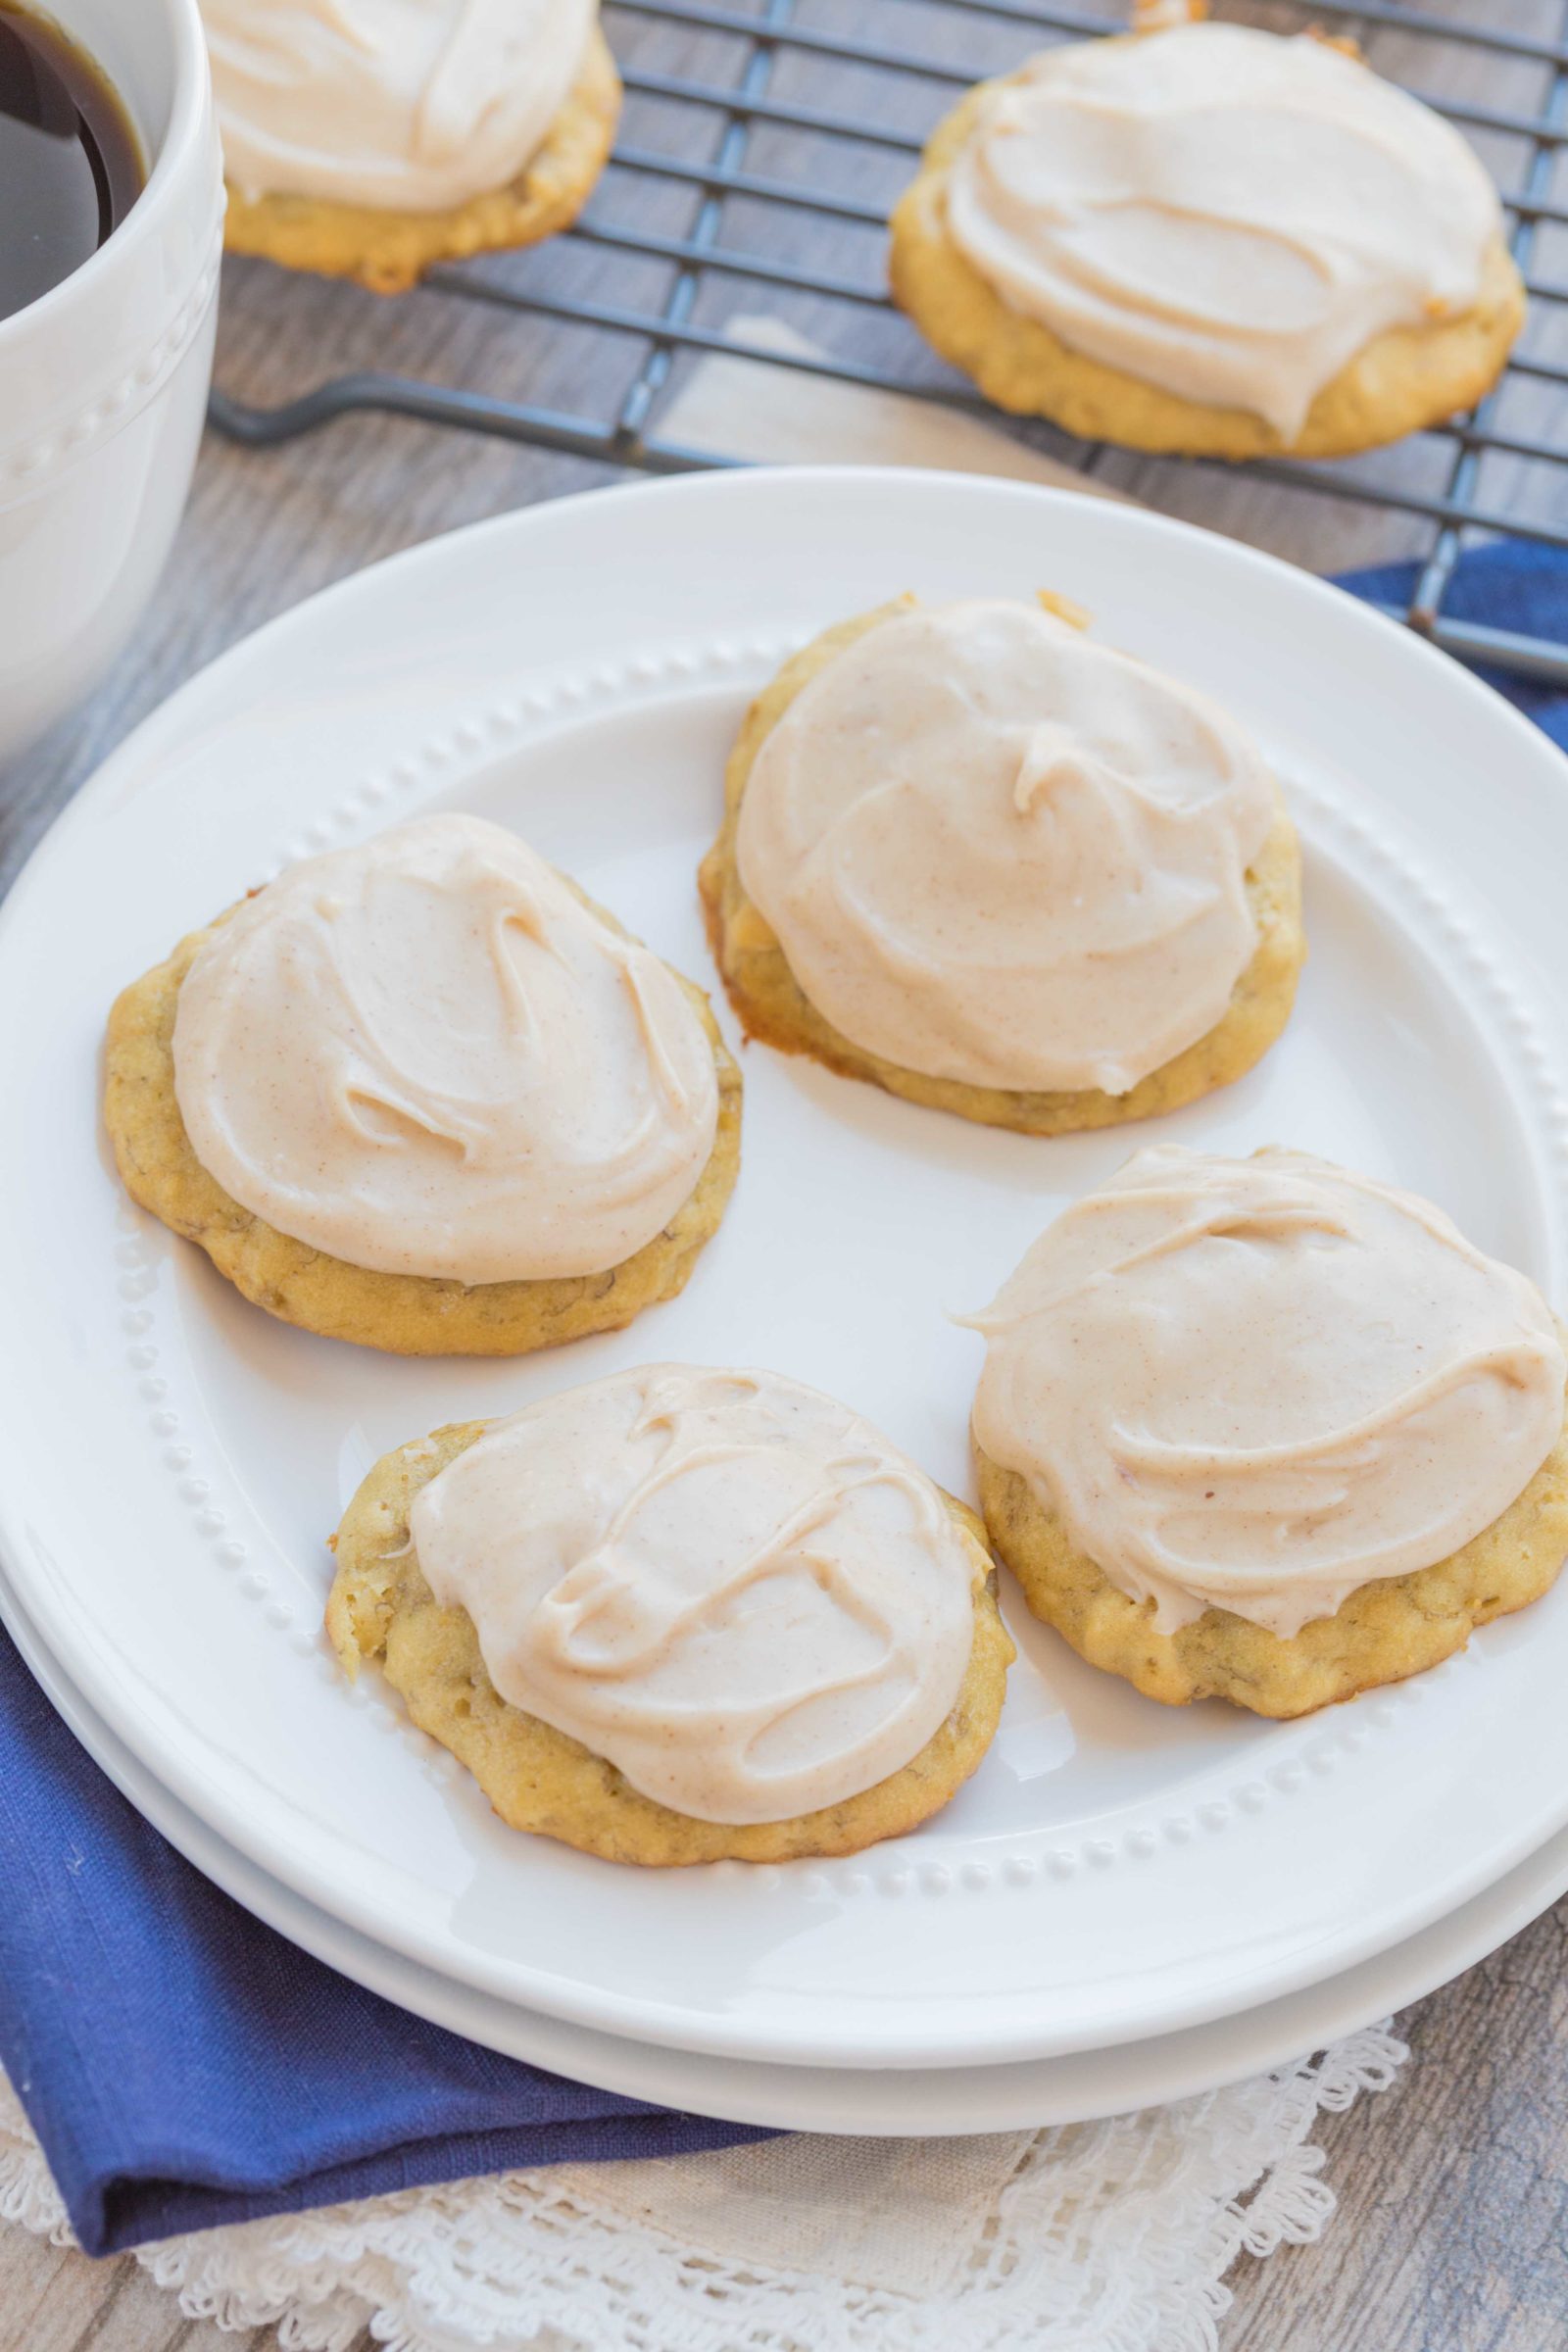 Banana Cookies with Browned Butter Frosting ~ mykitchencraze.com ~ Use up those browned bananas with this easy and delicious Banana Cookie recipe. Top them with a creamy and yummy Browned Butter Frosting. Everyone will love these cookies!